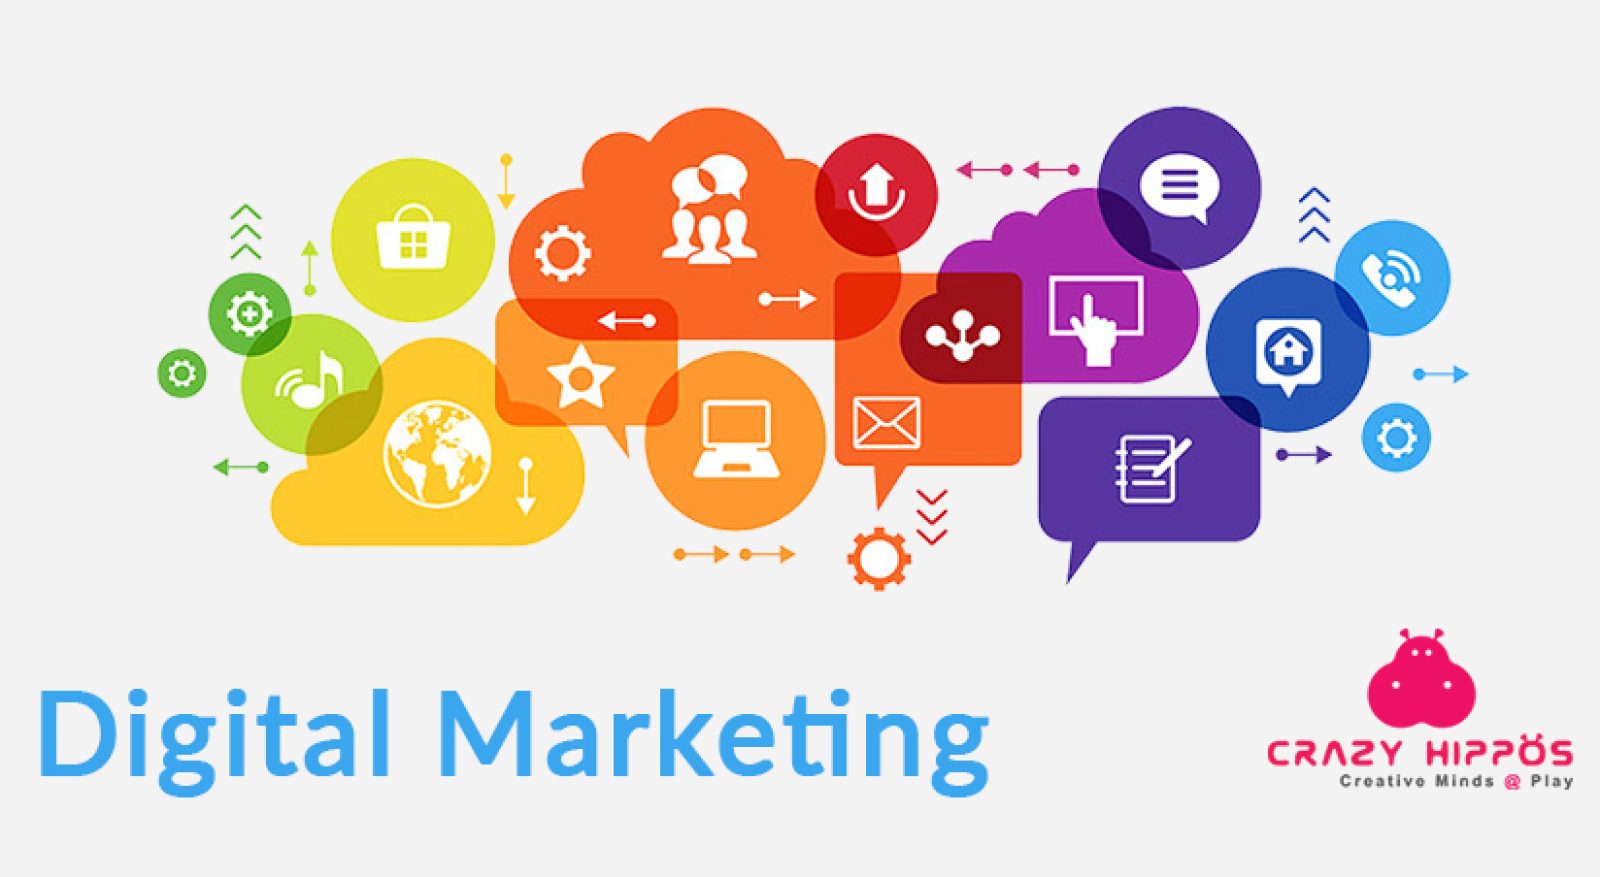 WHAT YOU MUST KNOW ABOUT YOUR DIGITAL MARKETING POSTS